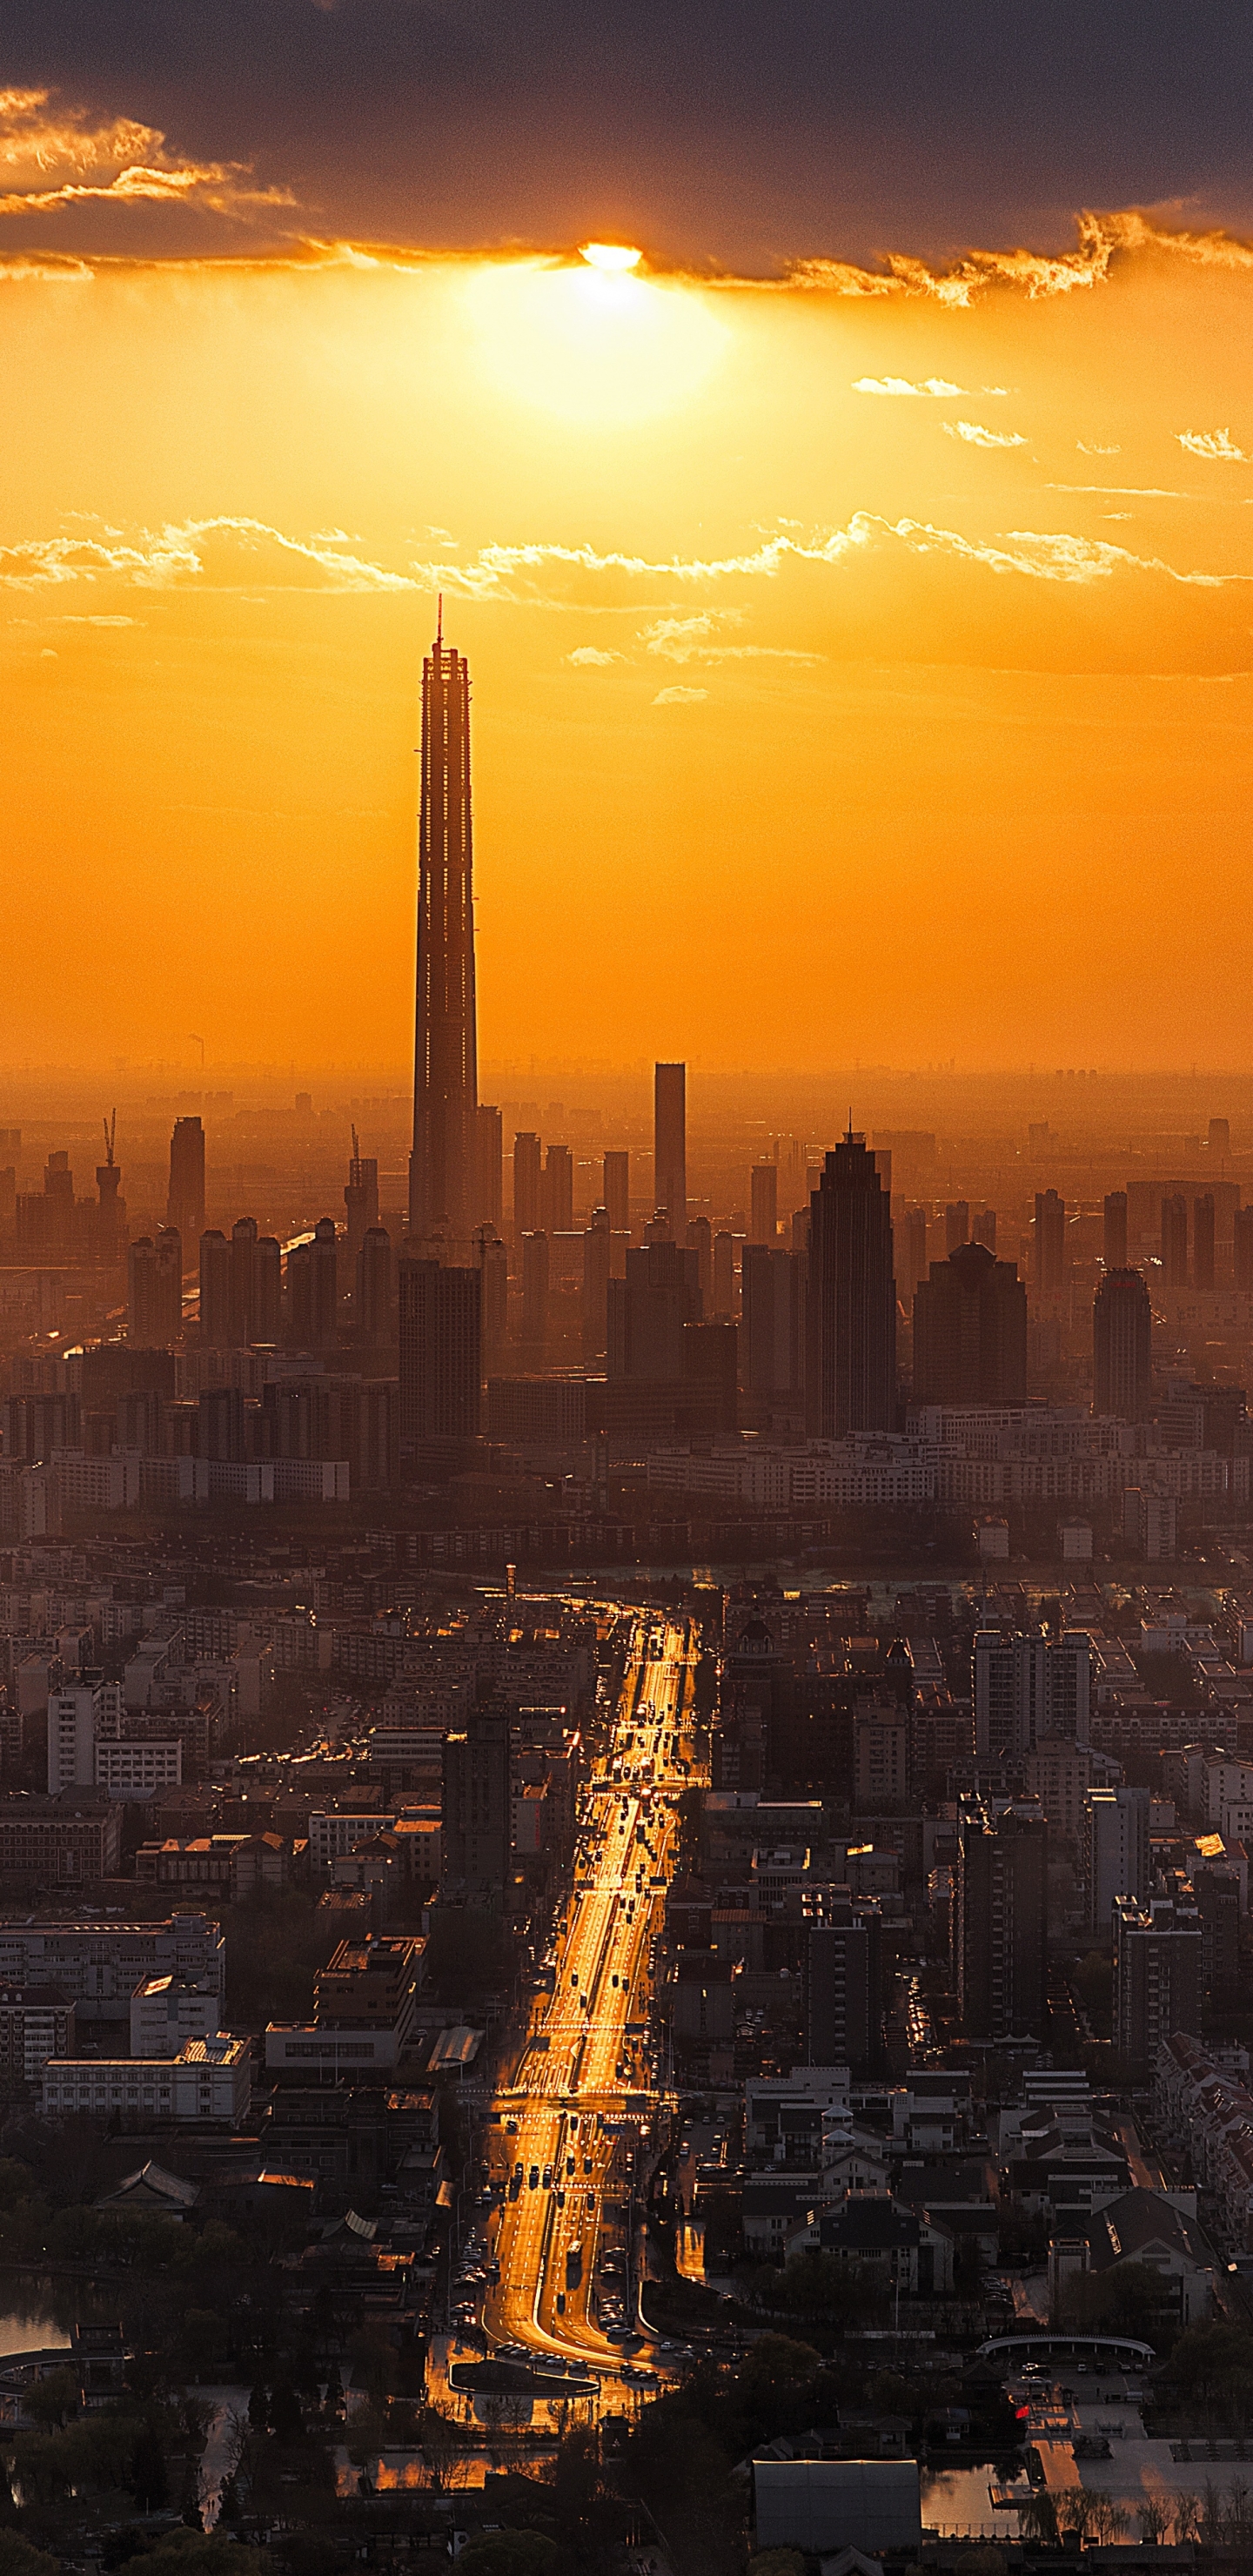 man made, tianjin, cityscape, sunset, building, cities